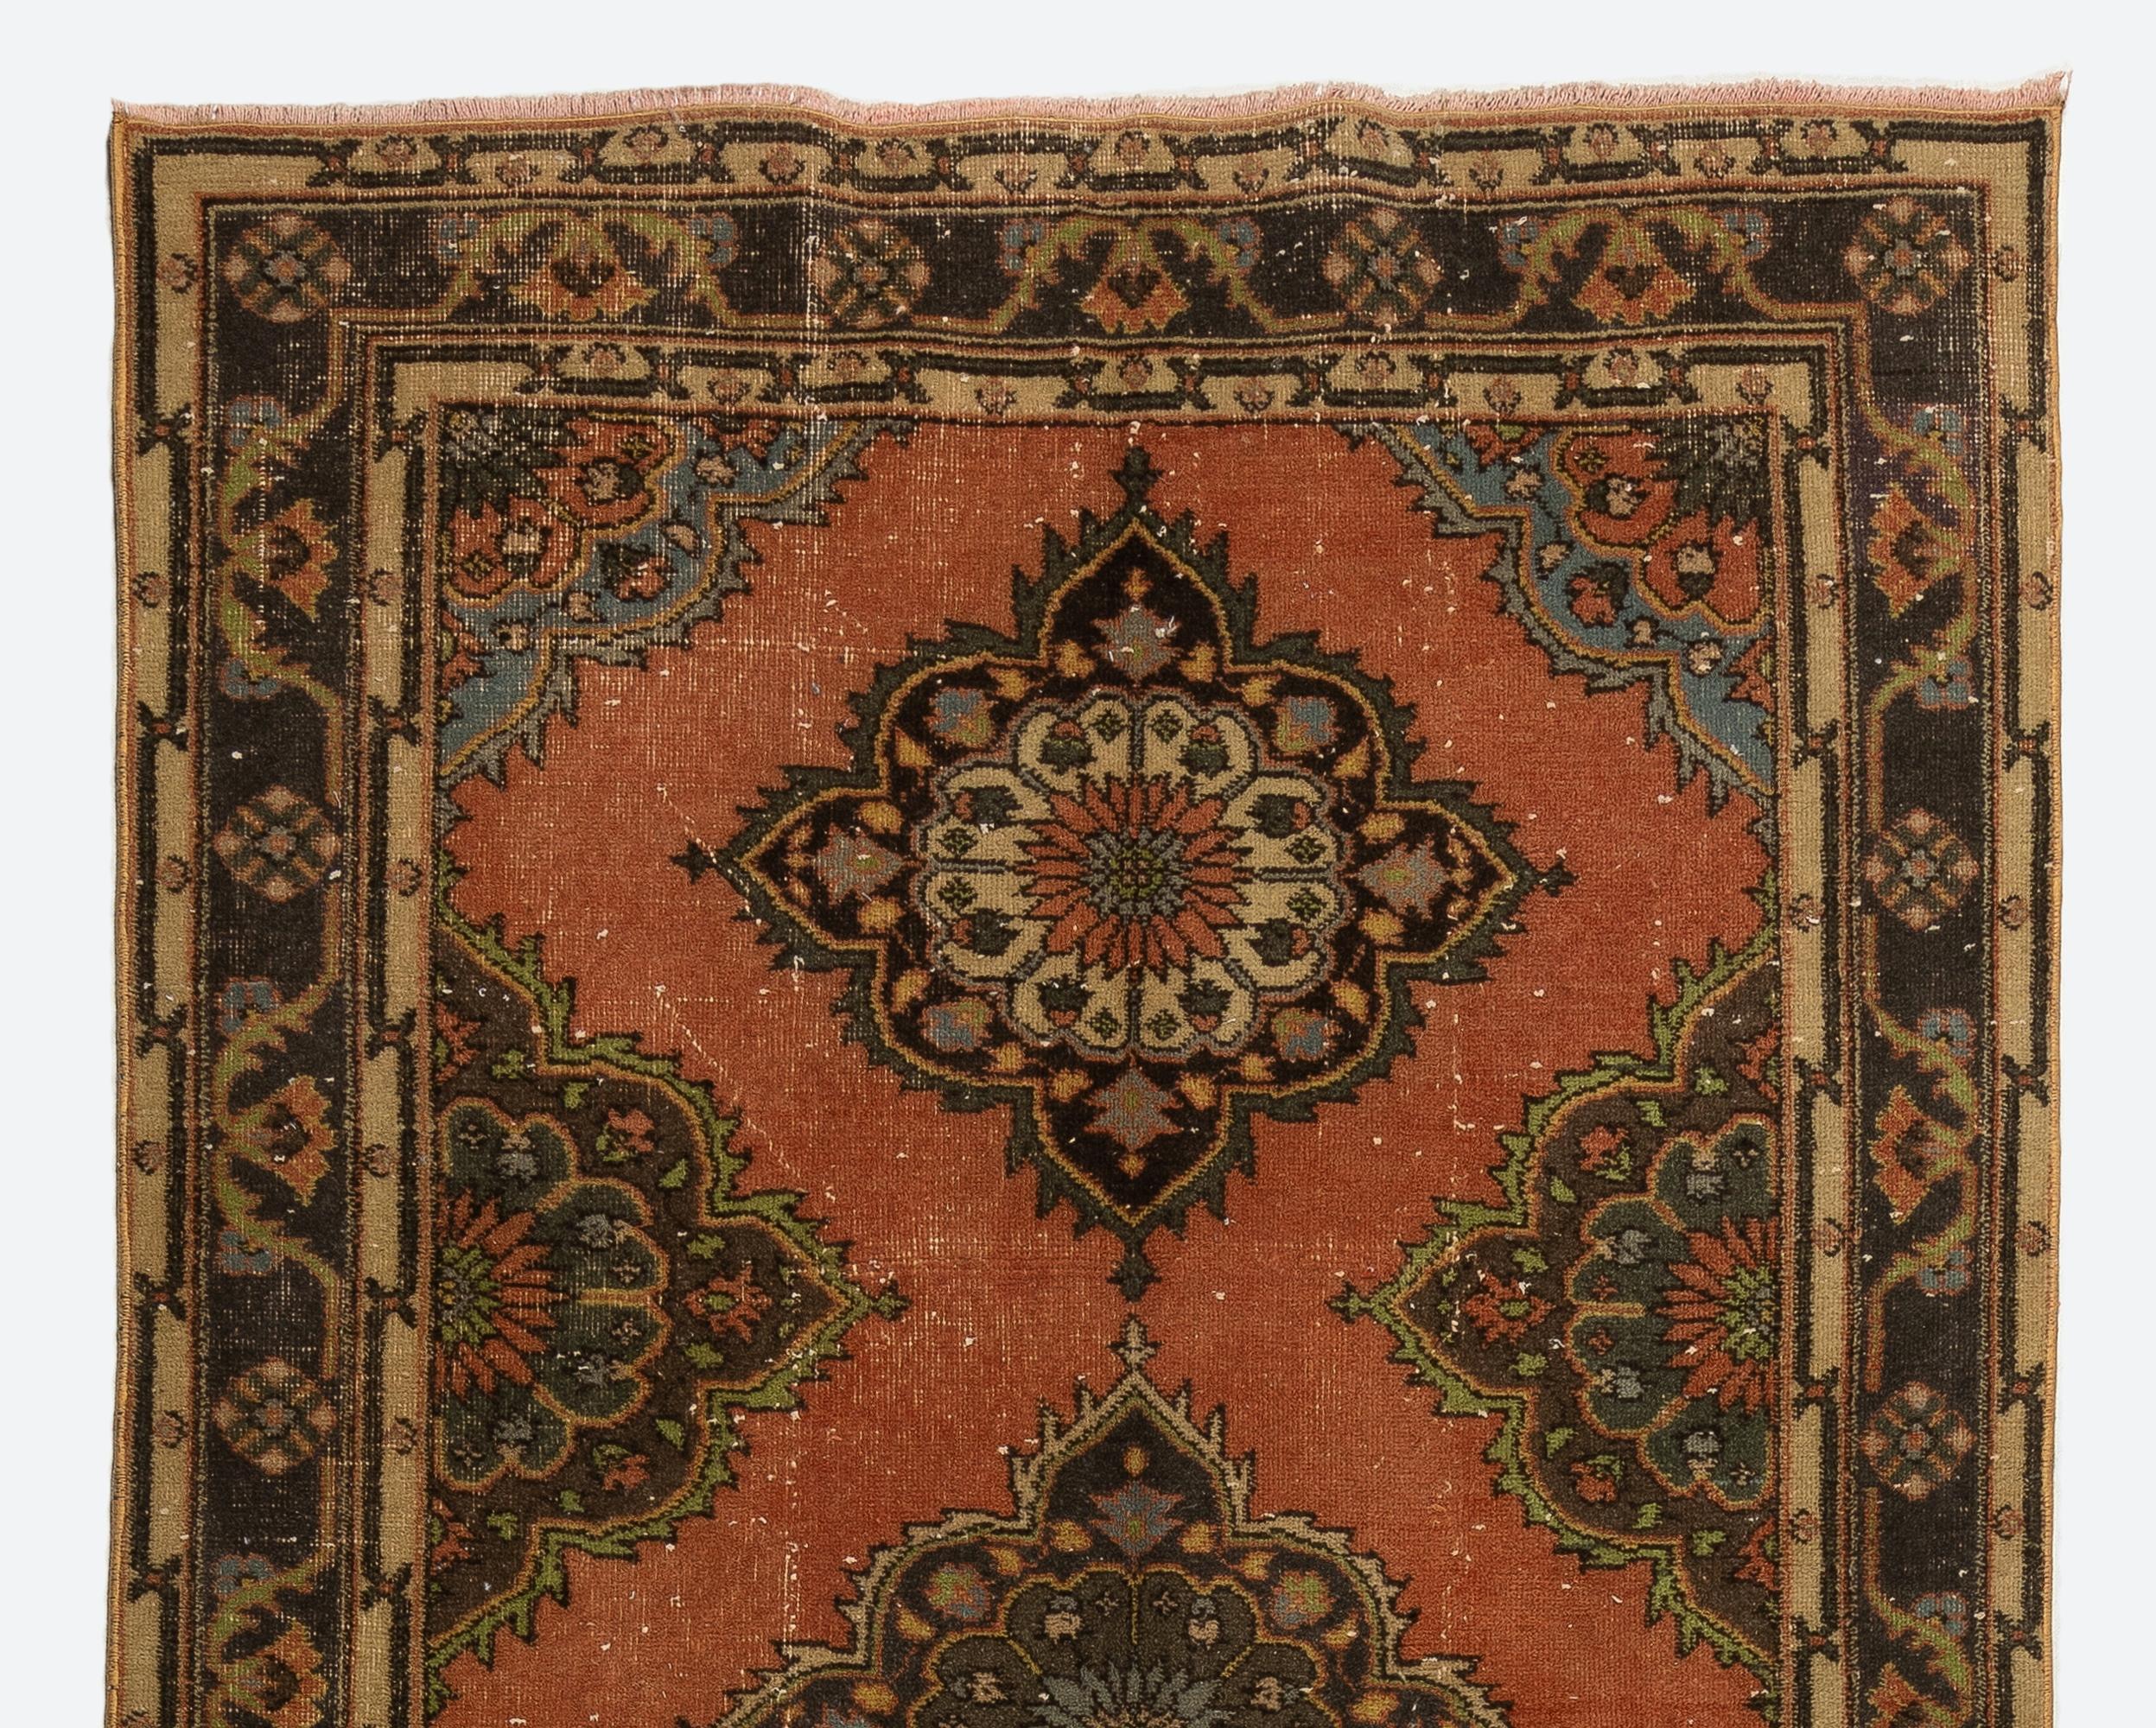 A Turkish runner rug in red, brown and beige. It was hand-knotted in the 1960s with low wool on cotton foundation and features a multiple medallion design. It is in very good condition, professionally-washed, sturdy and suitable for areas with high